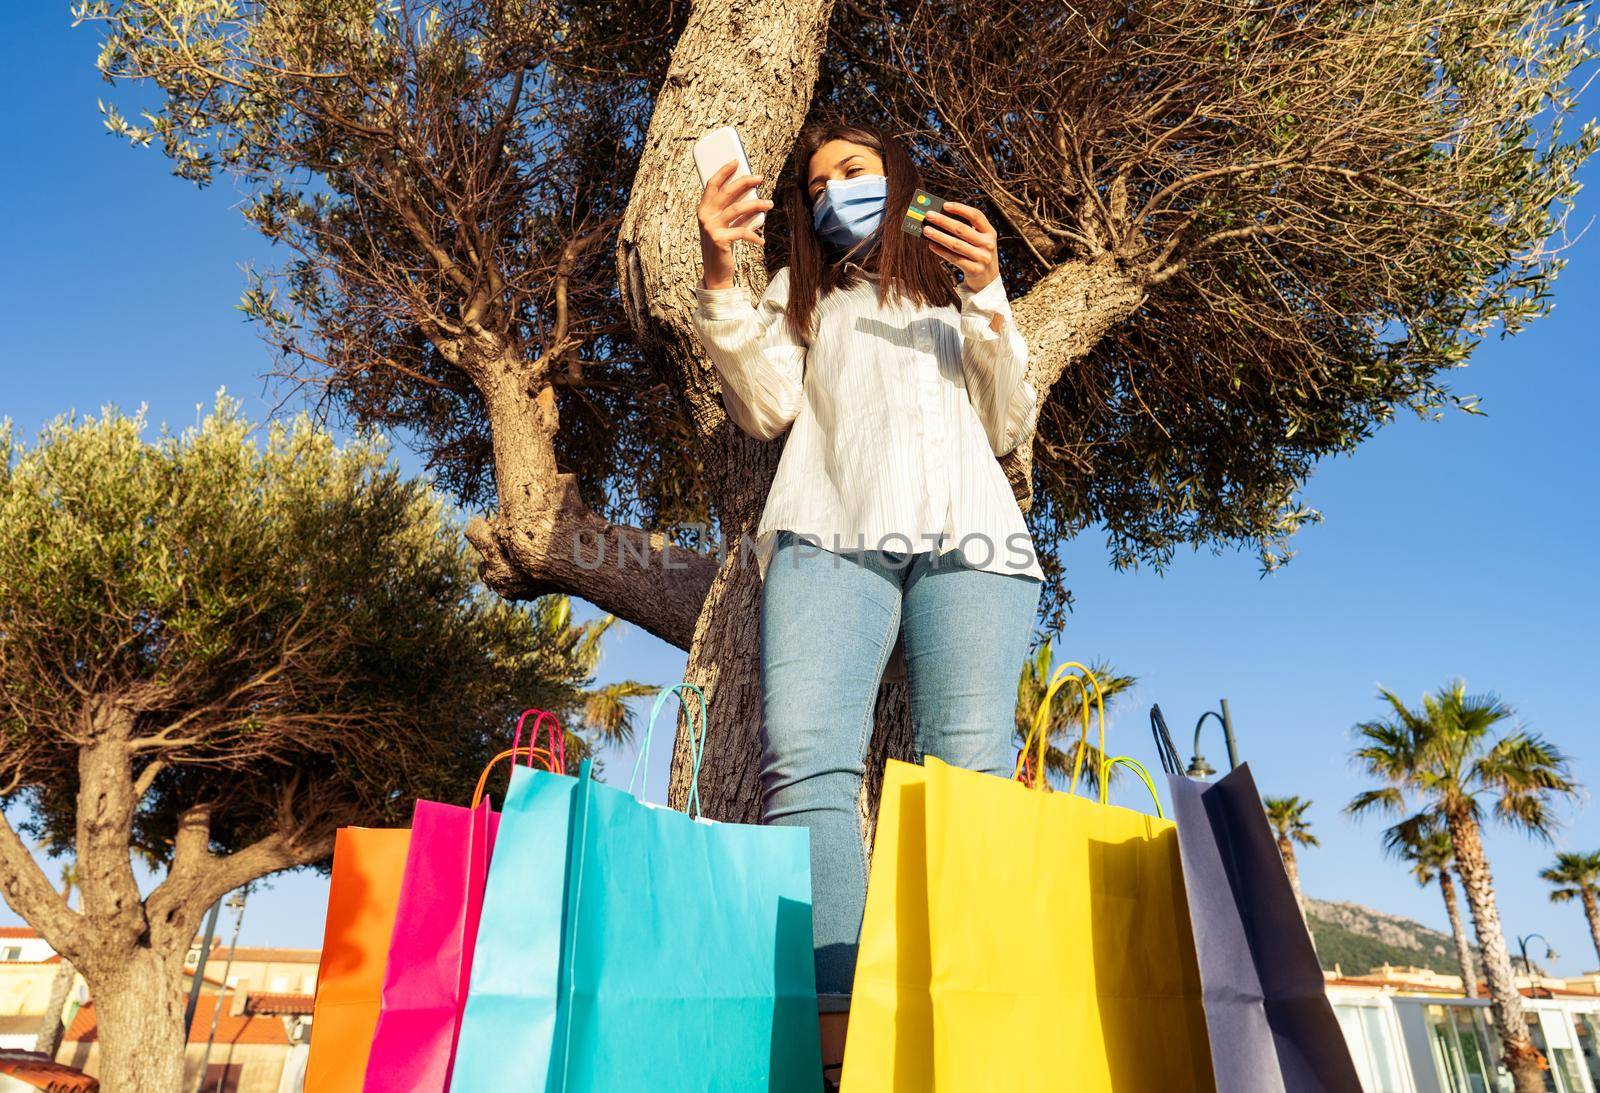 Lonely girl having fun in city park taking a break from a day of shopping using smartphone for new online credit card purchases. Young woman in Covid-19 protective face mask among many colored bags